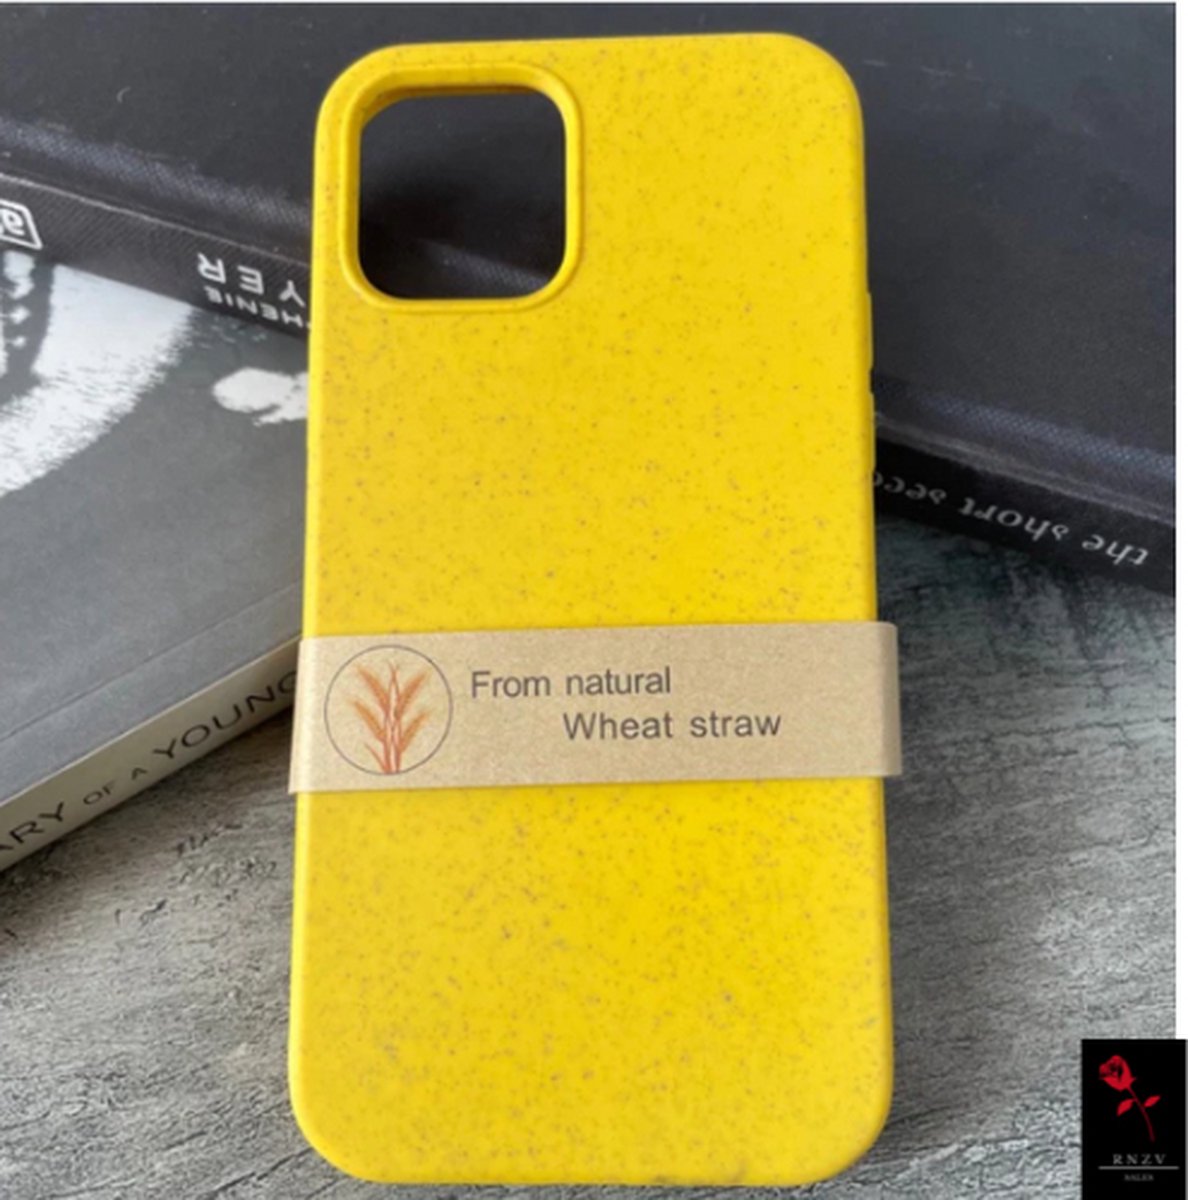 RNZV - IPHONE 12 MINI case - organic wheat straw case - organisch iphone hoesje - organic case - recycled iphone case - recycled - GEEL